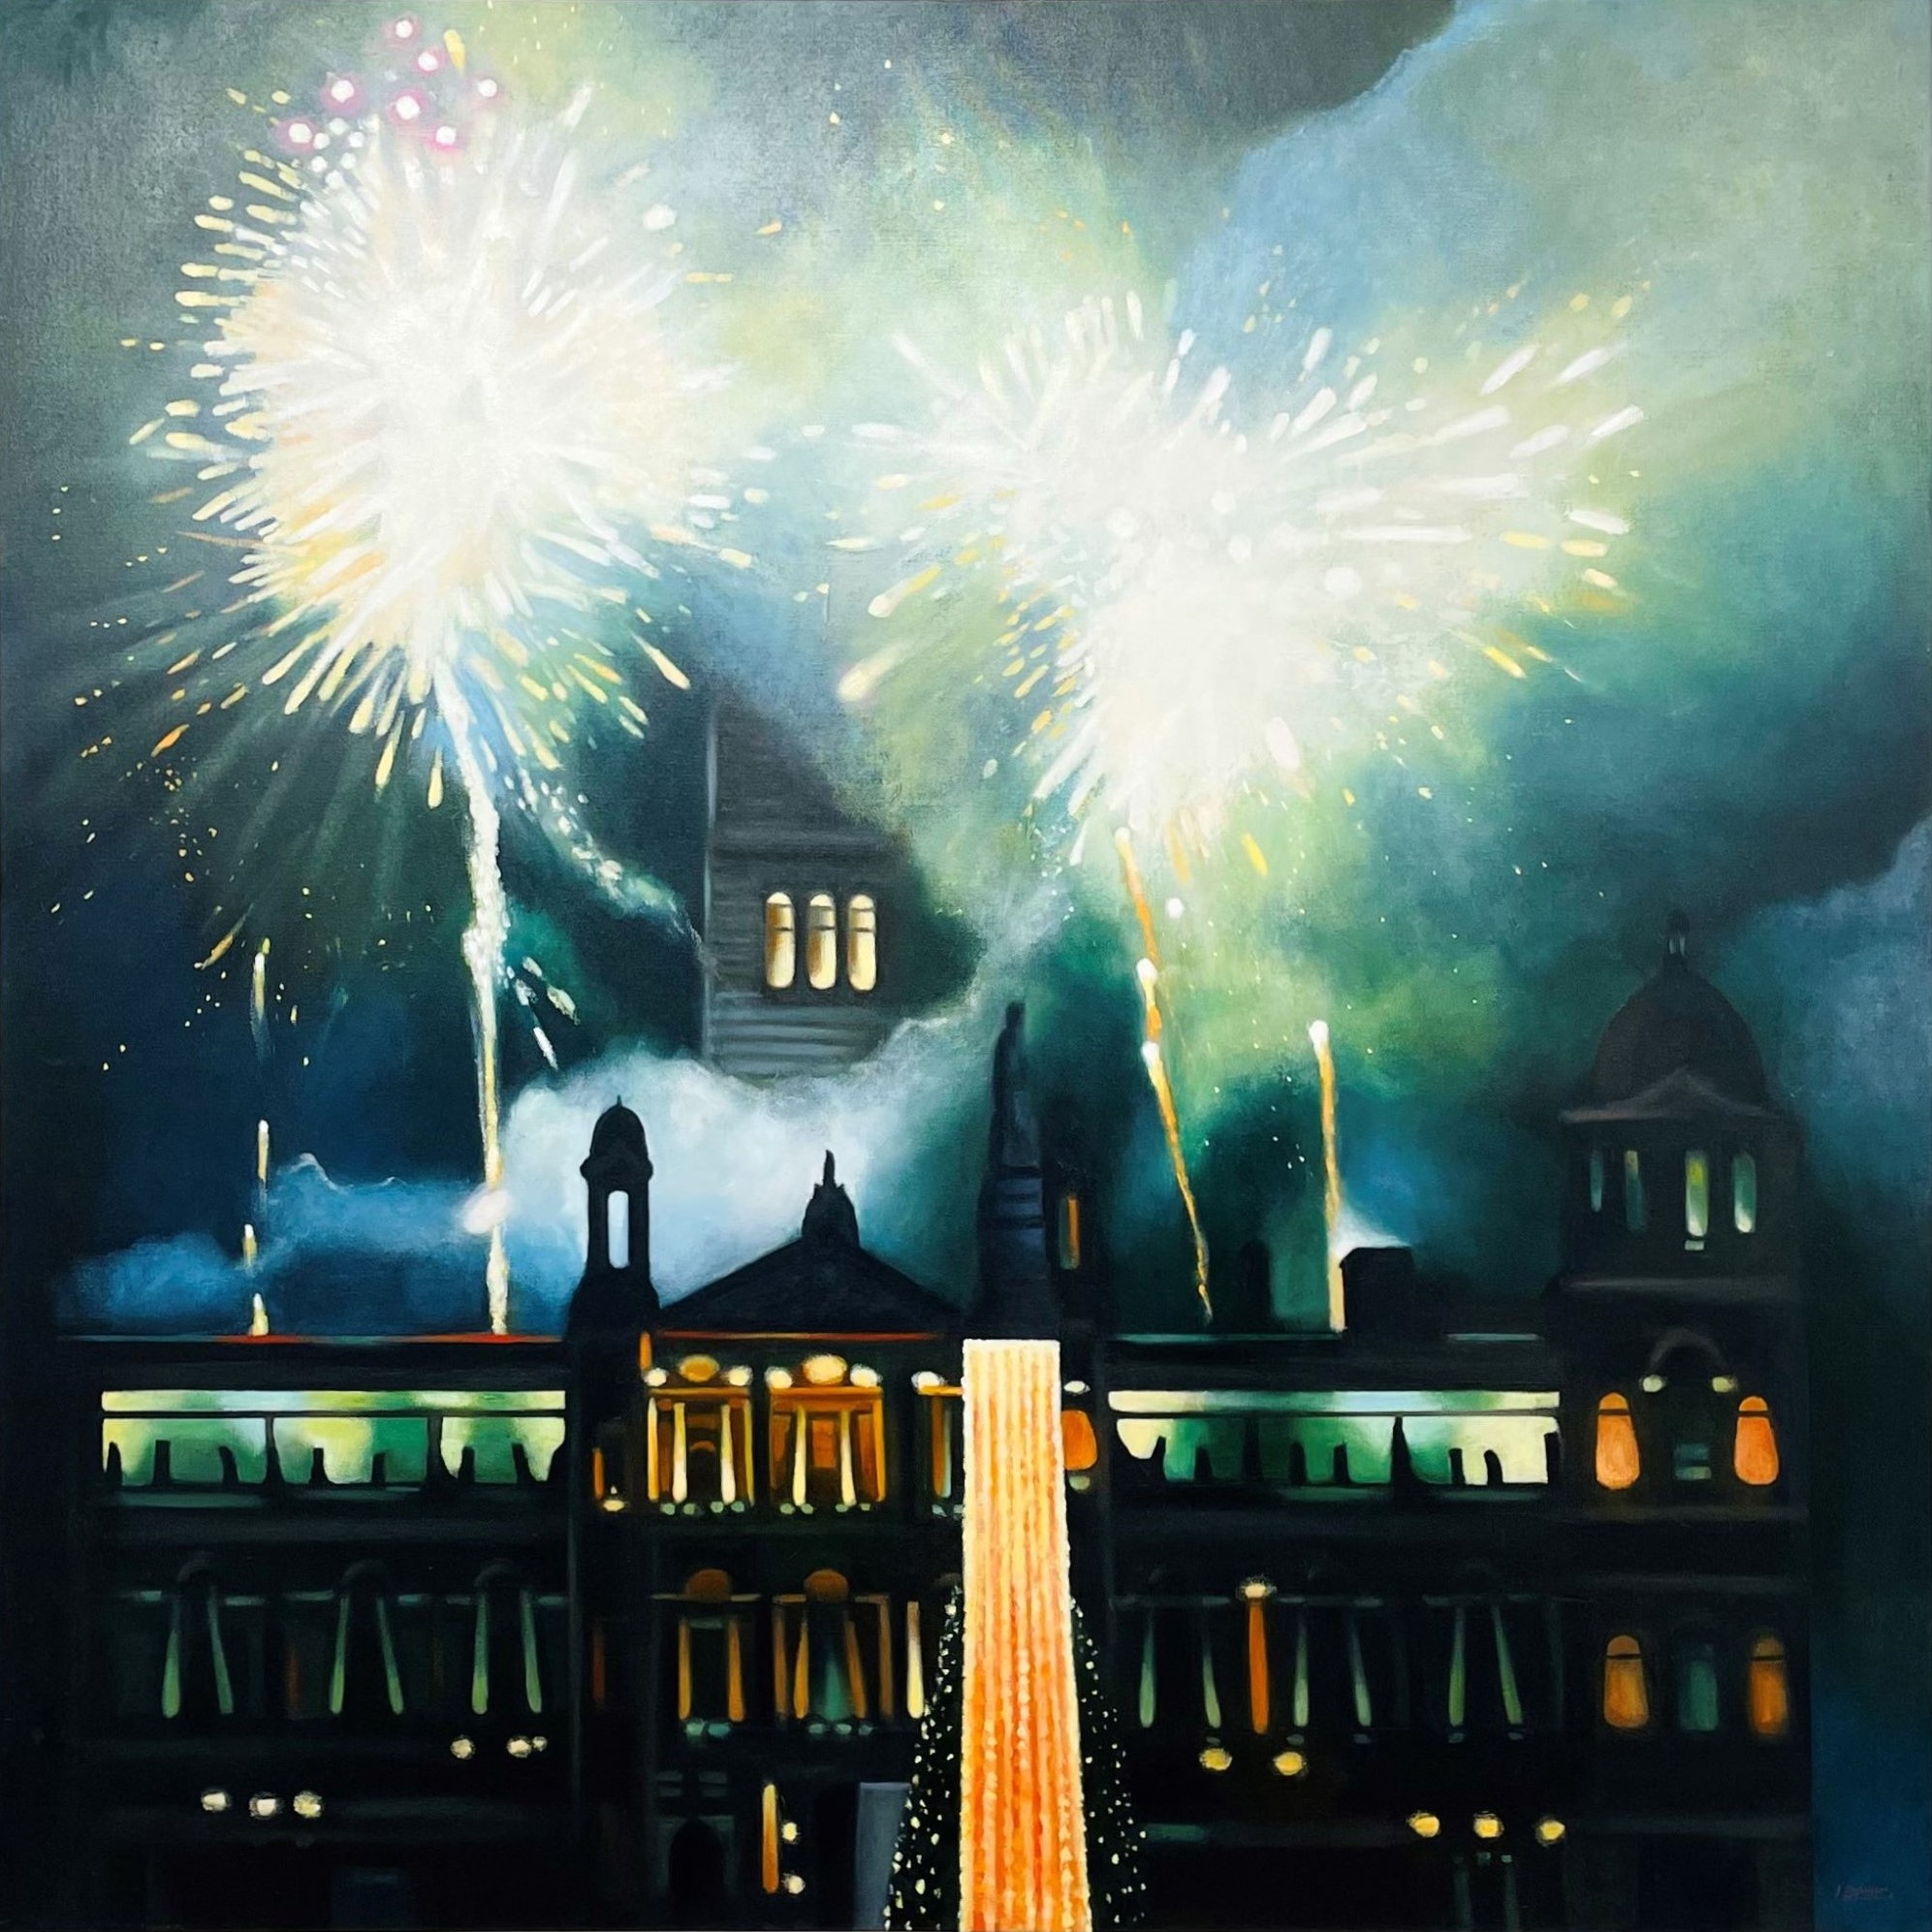 'Fireworks, Green and Gold' by artist Lesley Banks